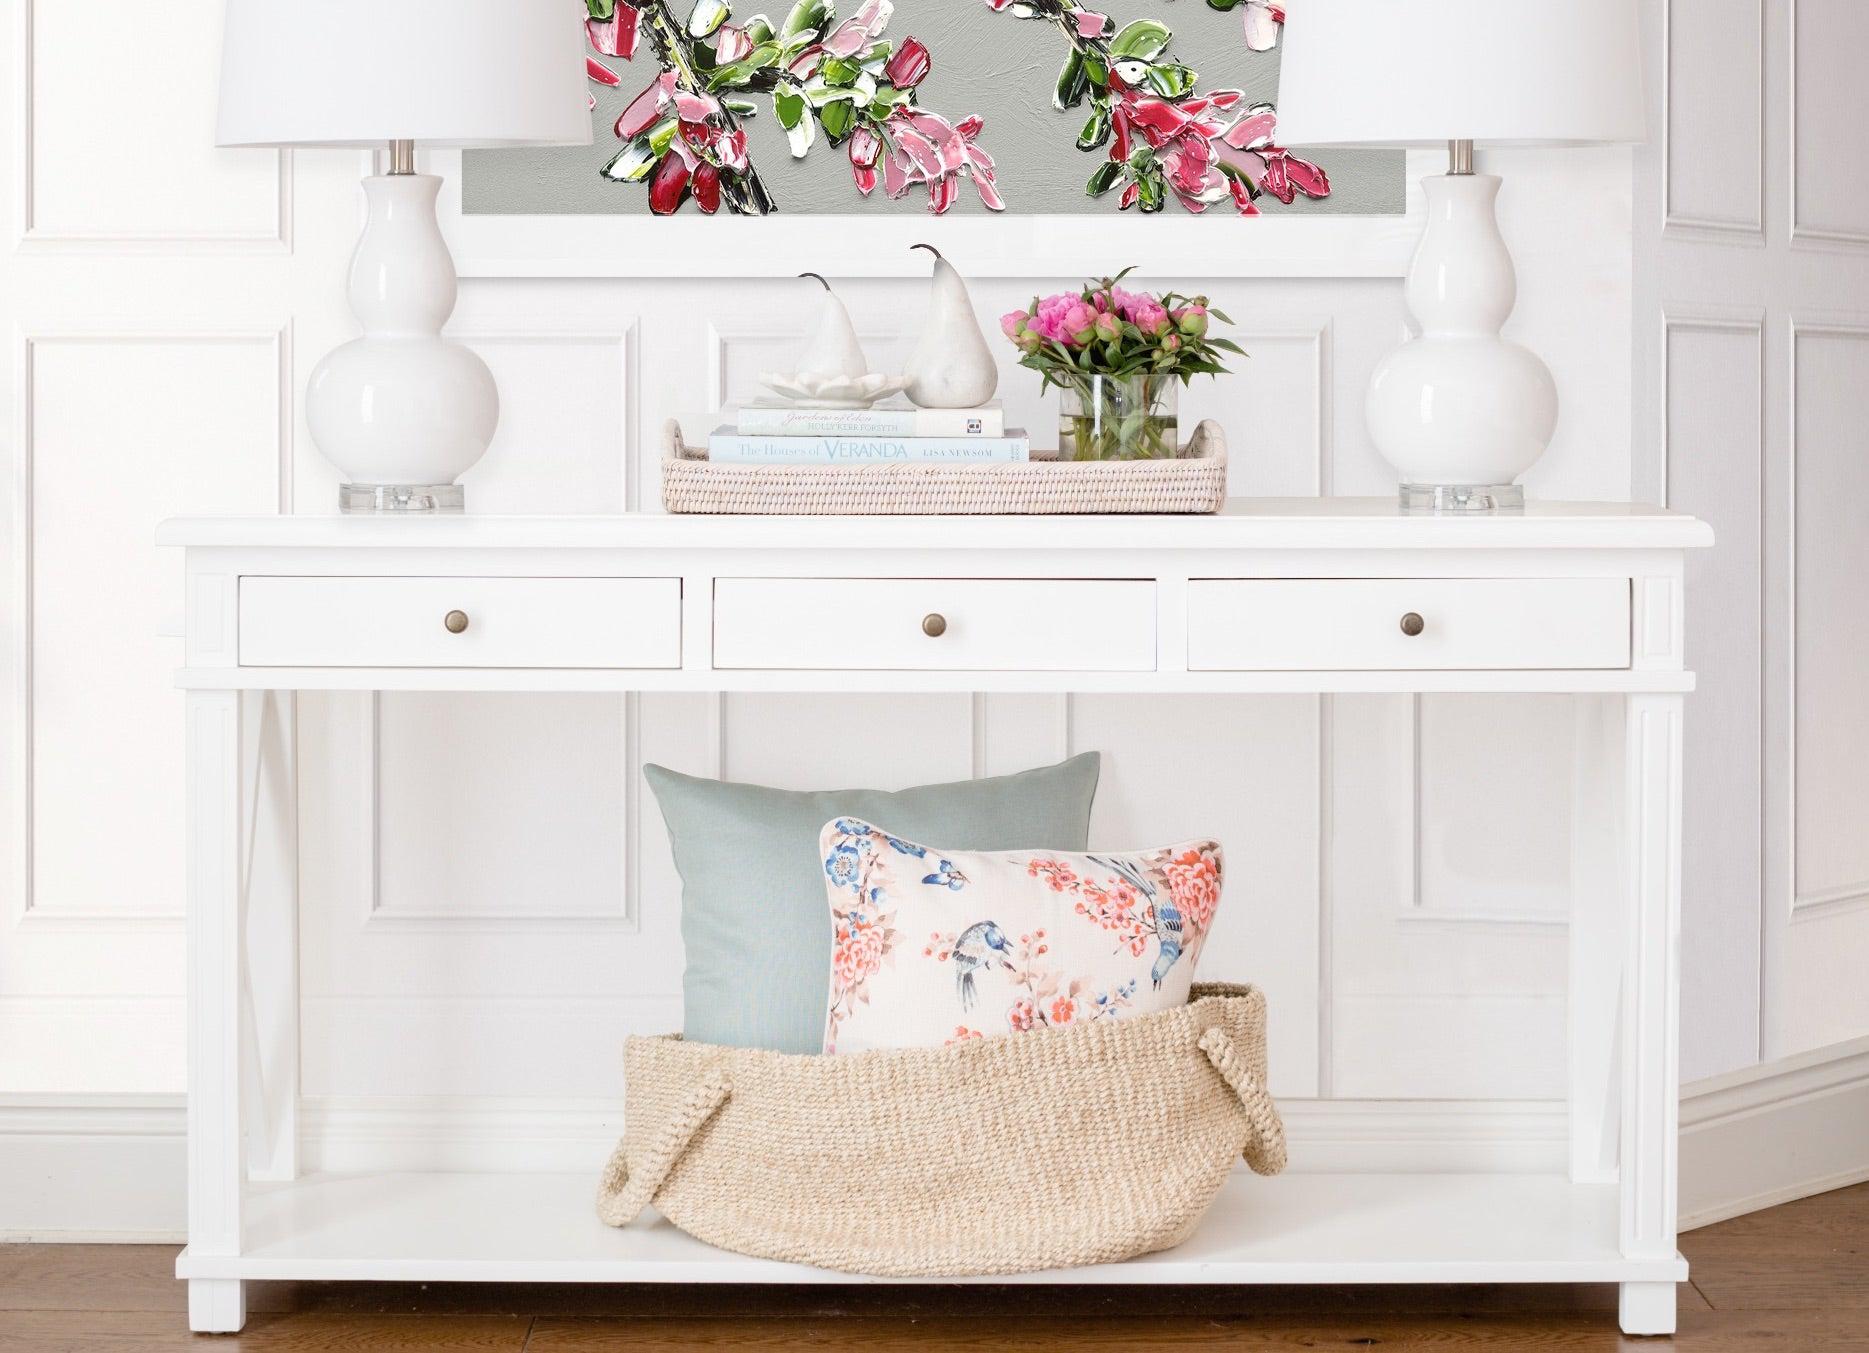 5 Ways to Style Baskets in a Hamptons Home